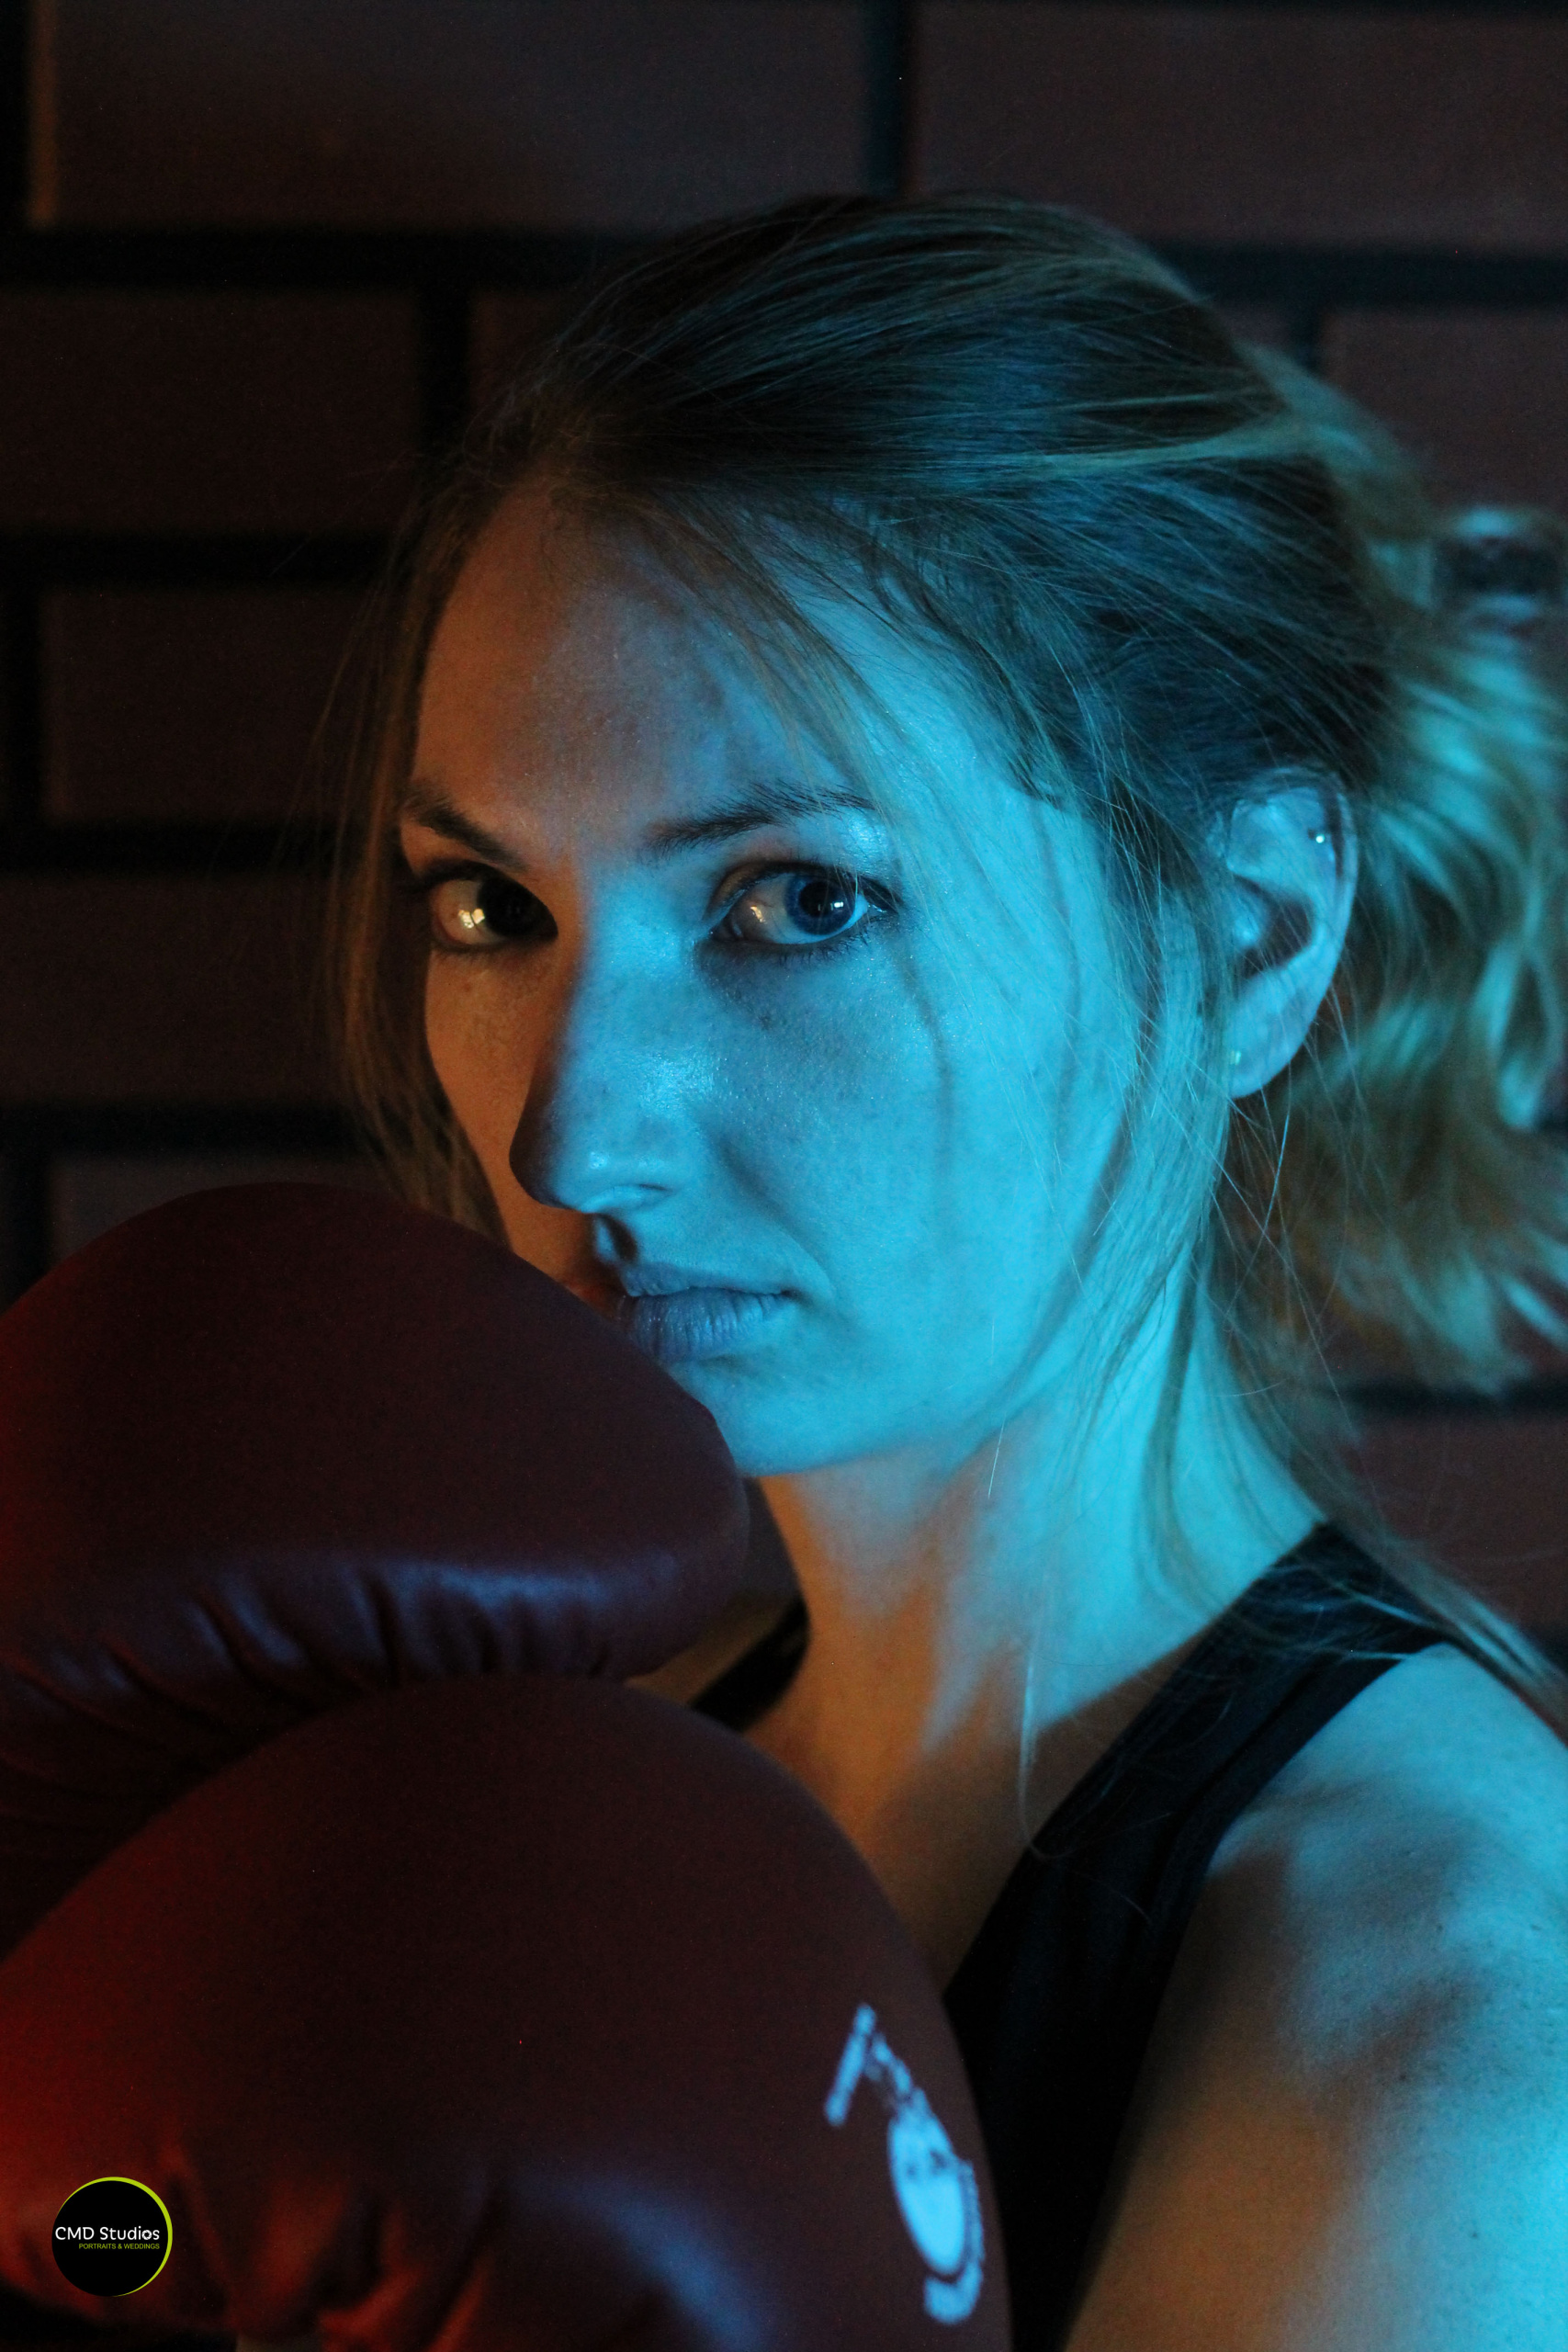 girl with boxing gloves